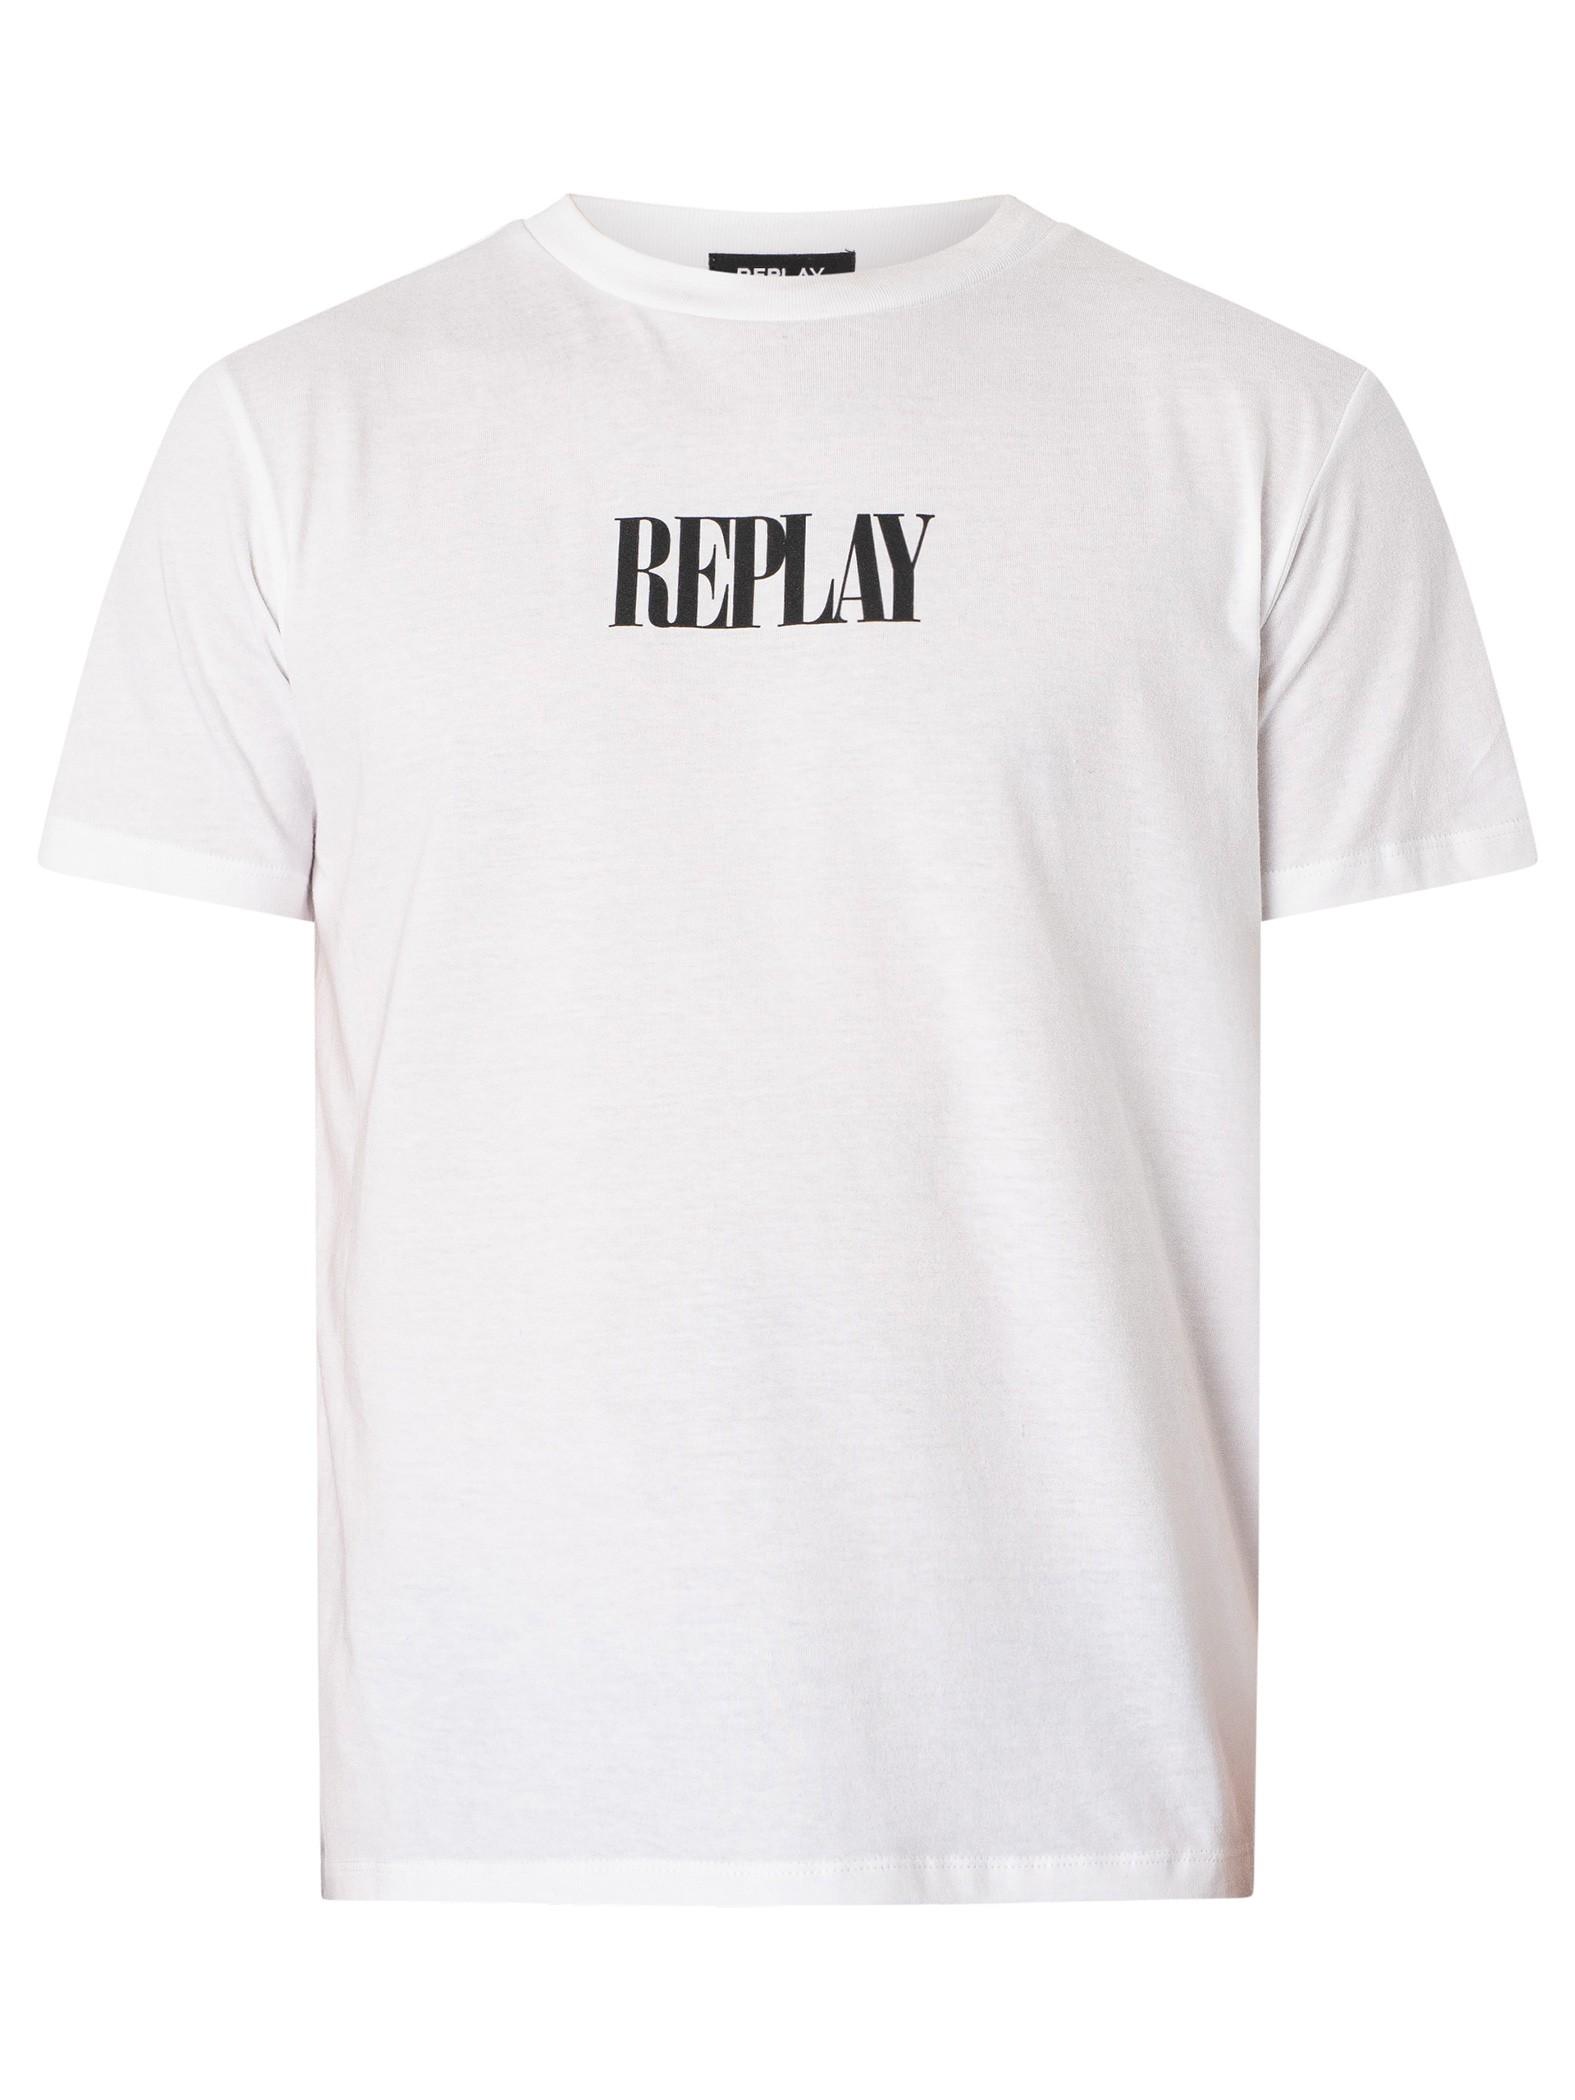 Lyst Replay | T-shirt Men for in White Graphic Back